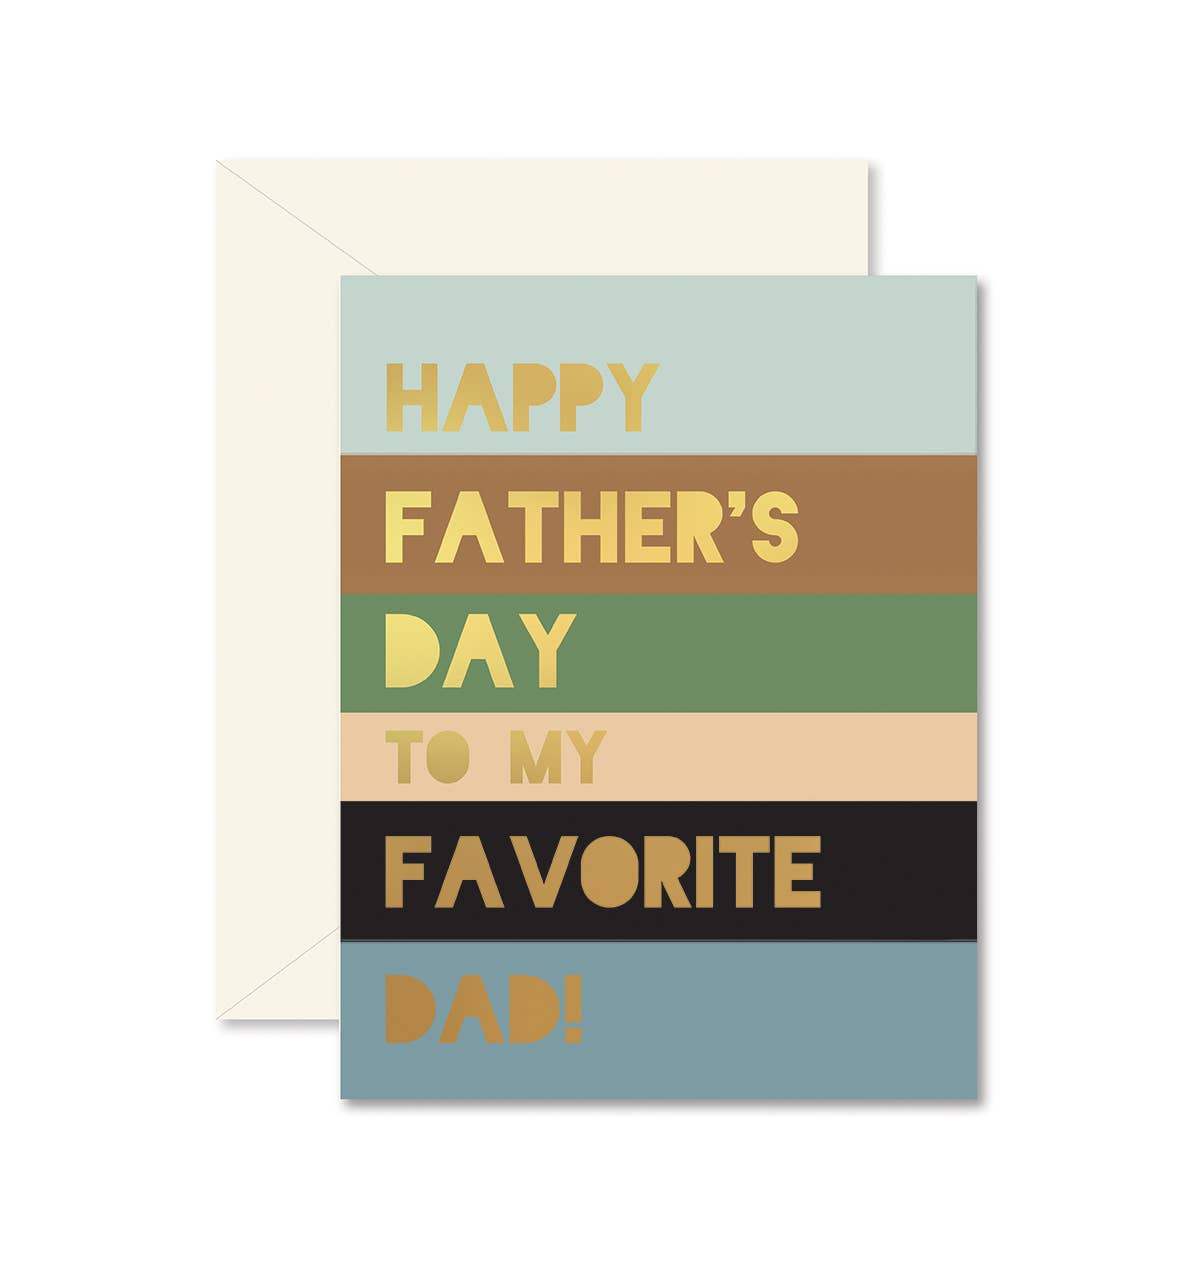 Colorblock Favorite Dad Greeting Card with coordinating envelope by Ginger P. Designs. Card front says Happy Father's Day to my favorite dad!